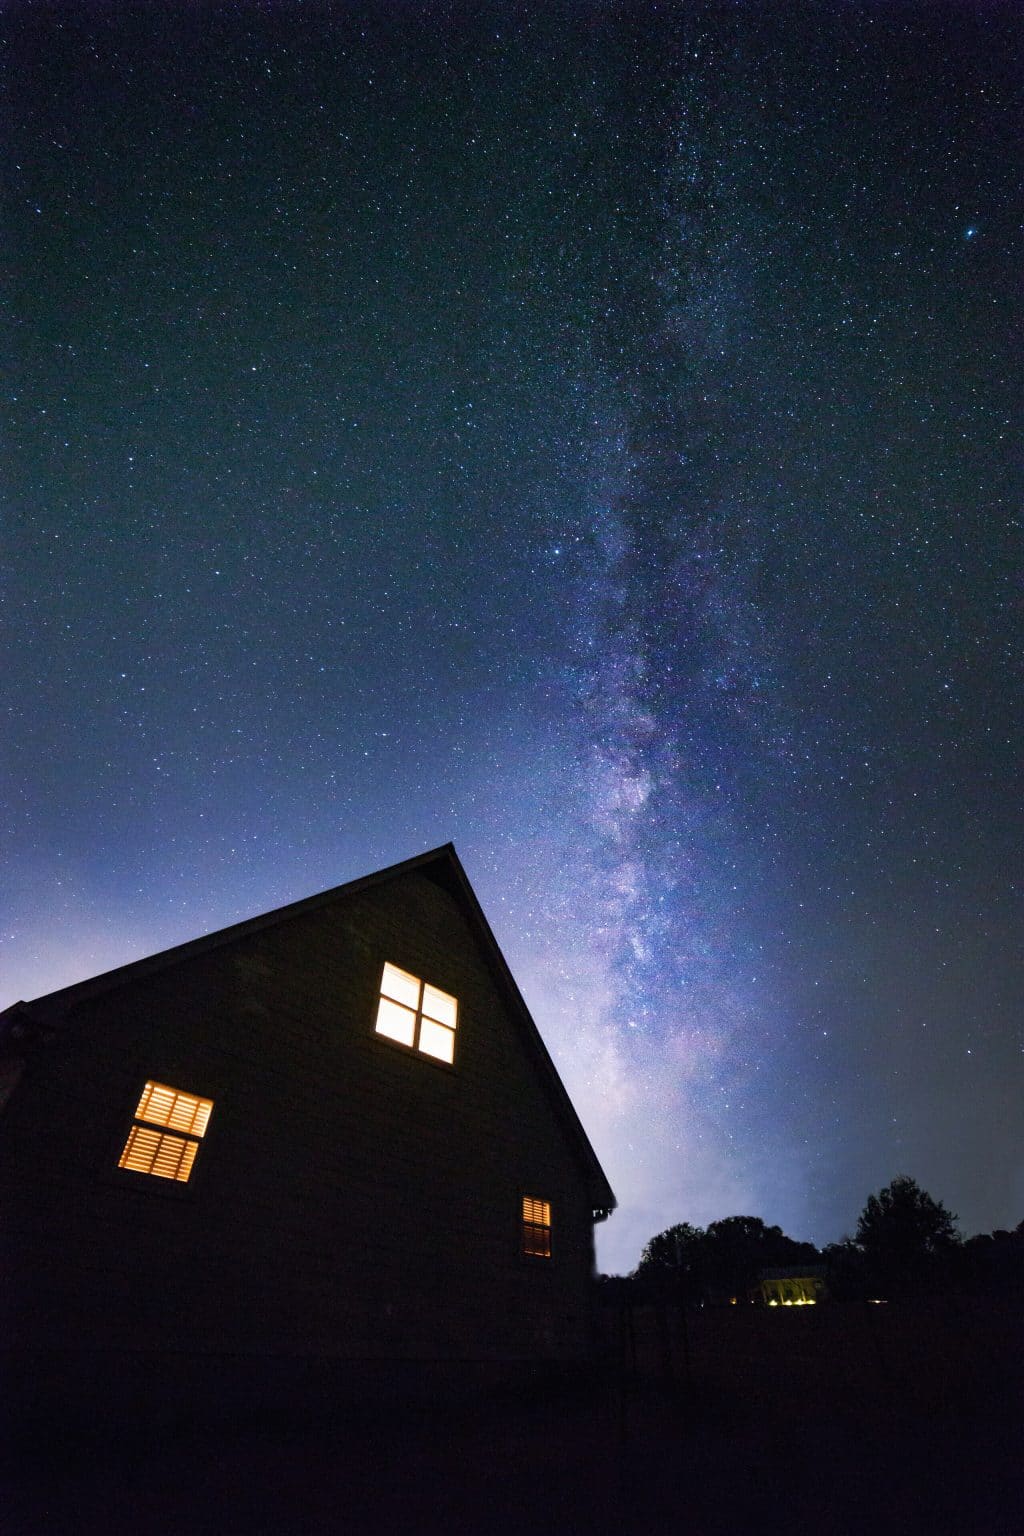 Milky Way over a house